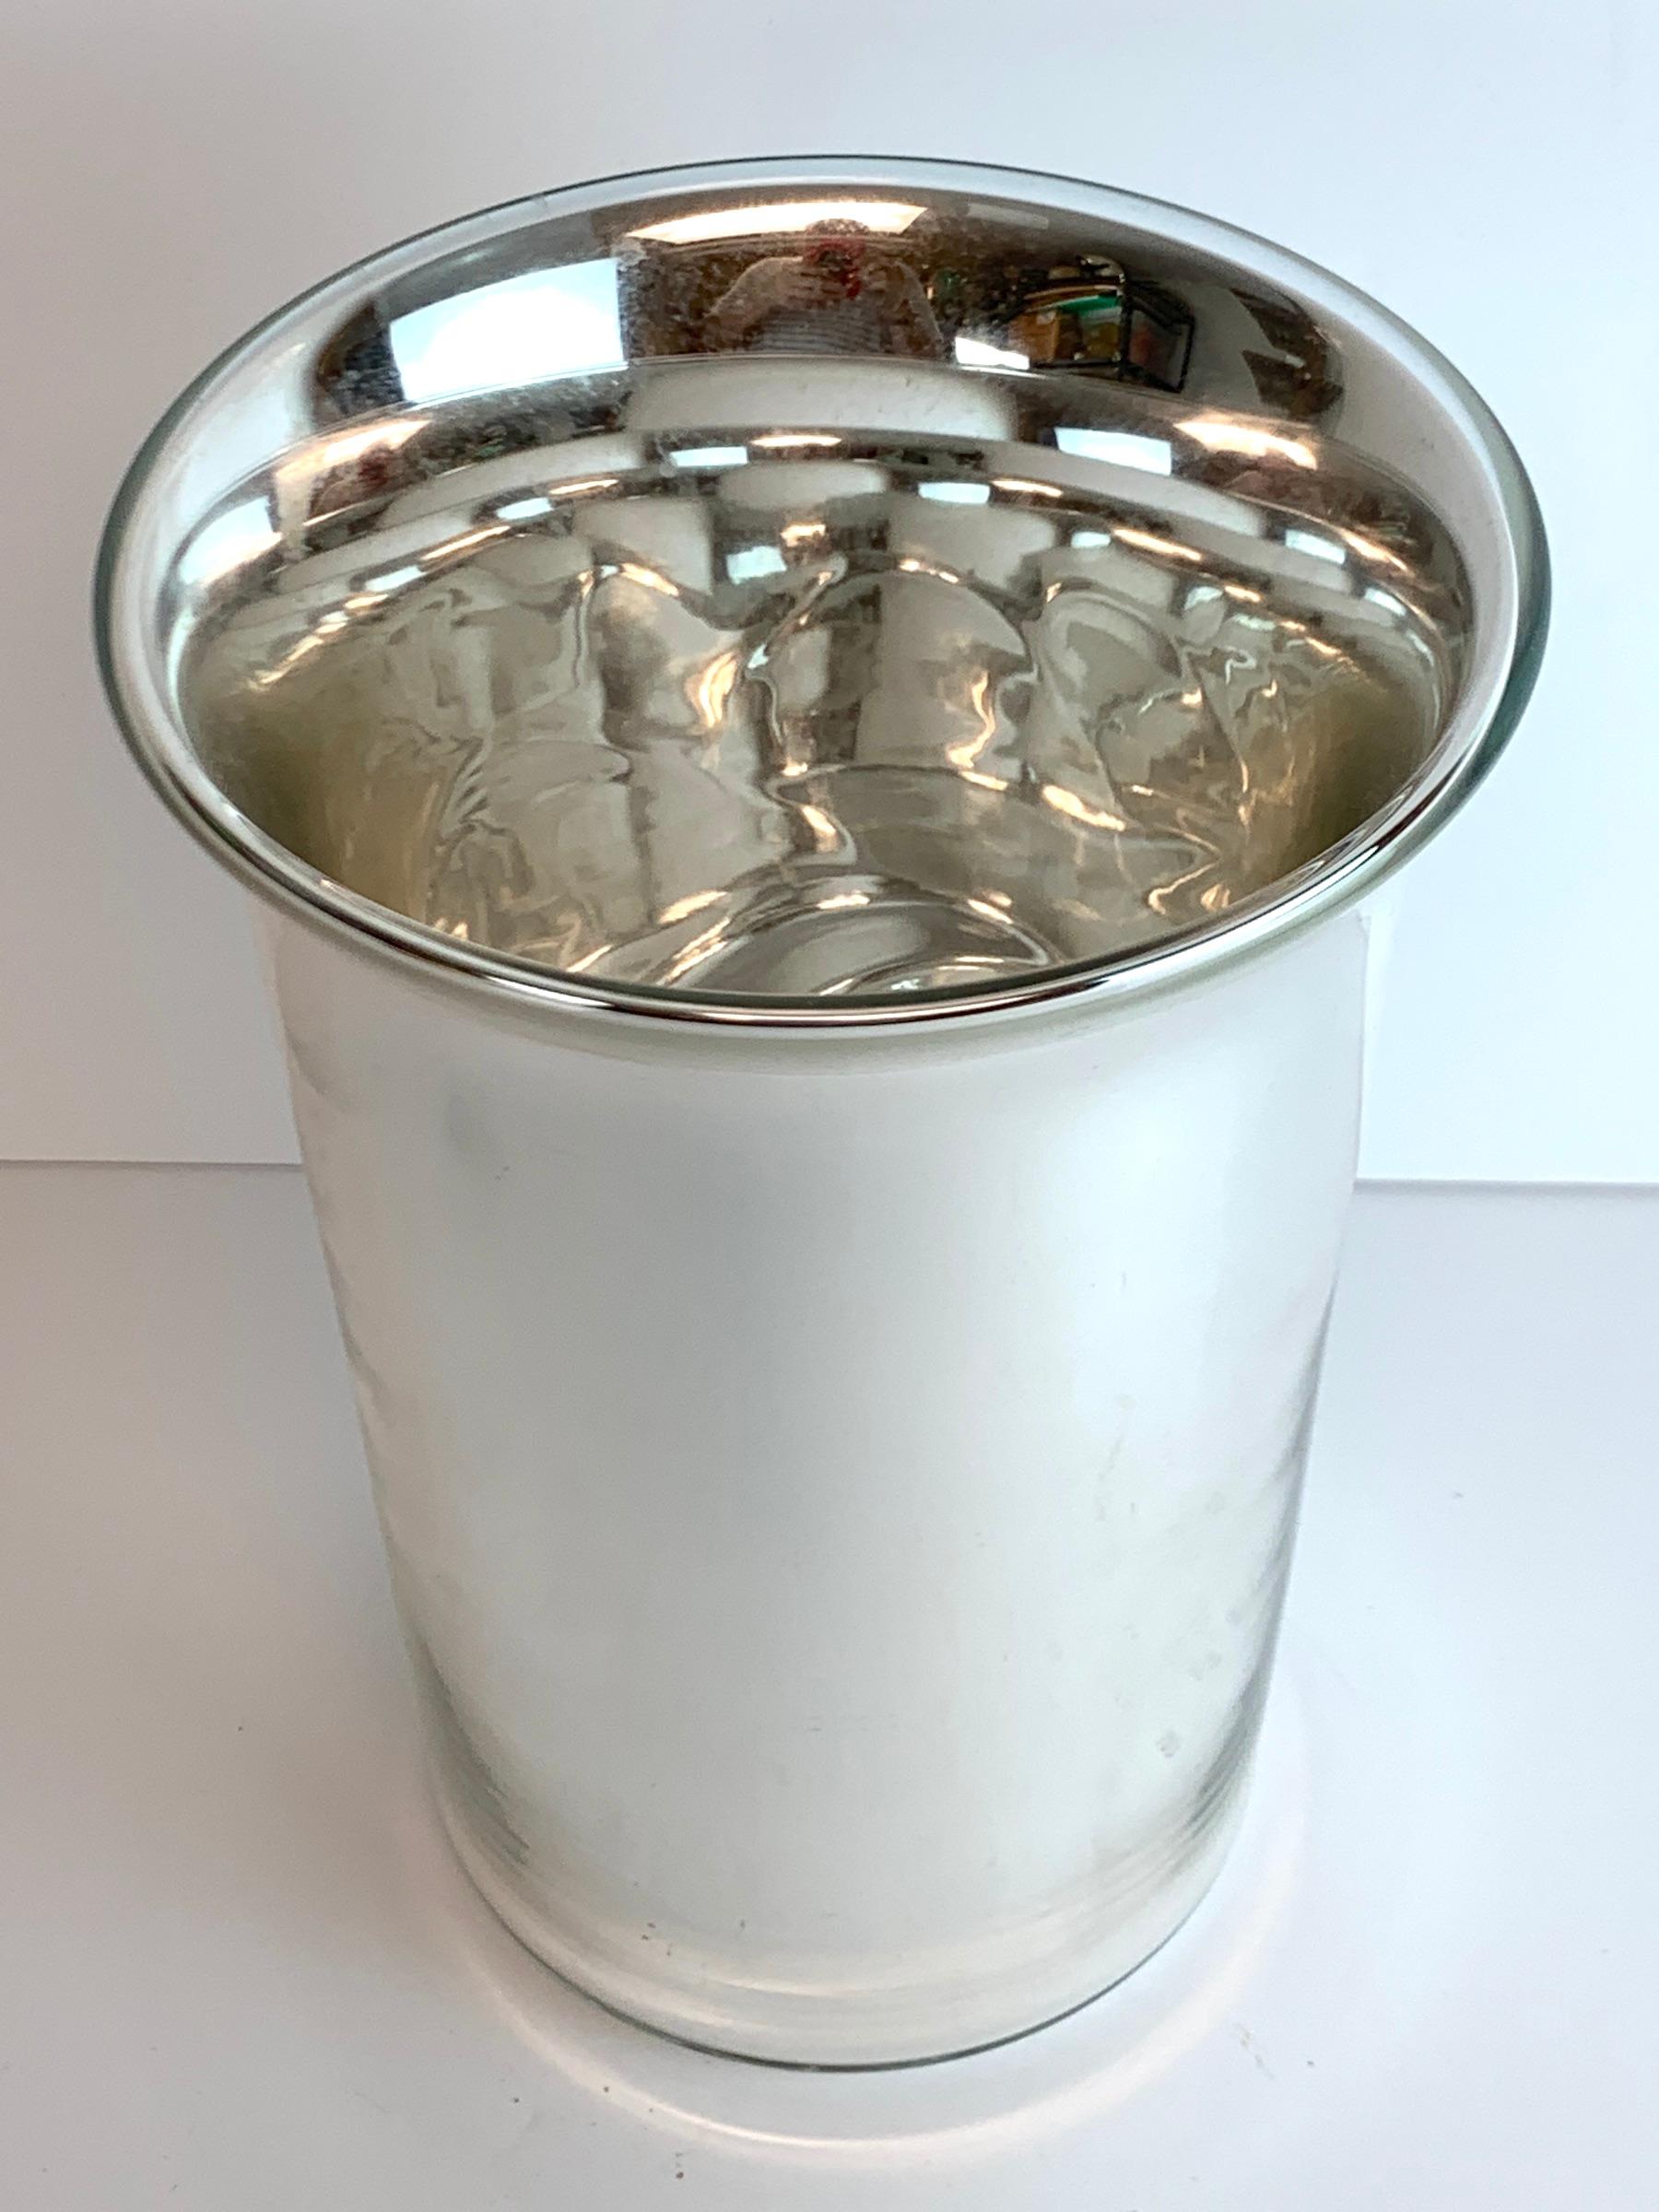 French Modern Style Mercury Glass Champagne/Wine Bucket
Purchased in France, 1980s
Of typical cylinder form, mirror finish all around
Overall measurements:
9.5 -inches high x 6.5-Inch diameter/ 5.5-inch interior diameter/

